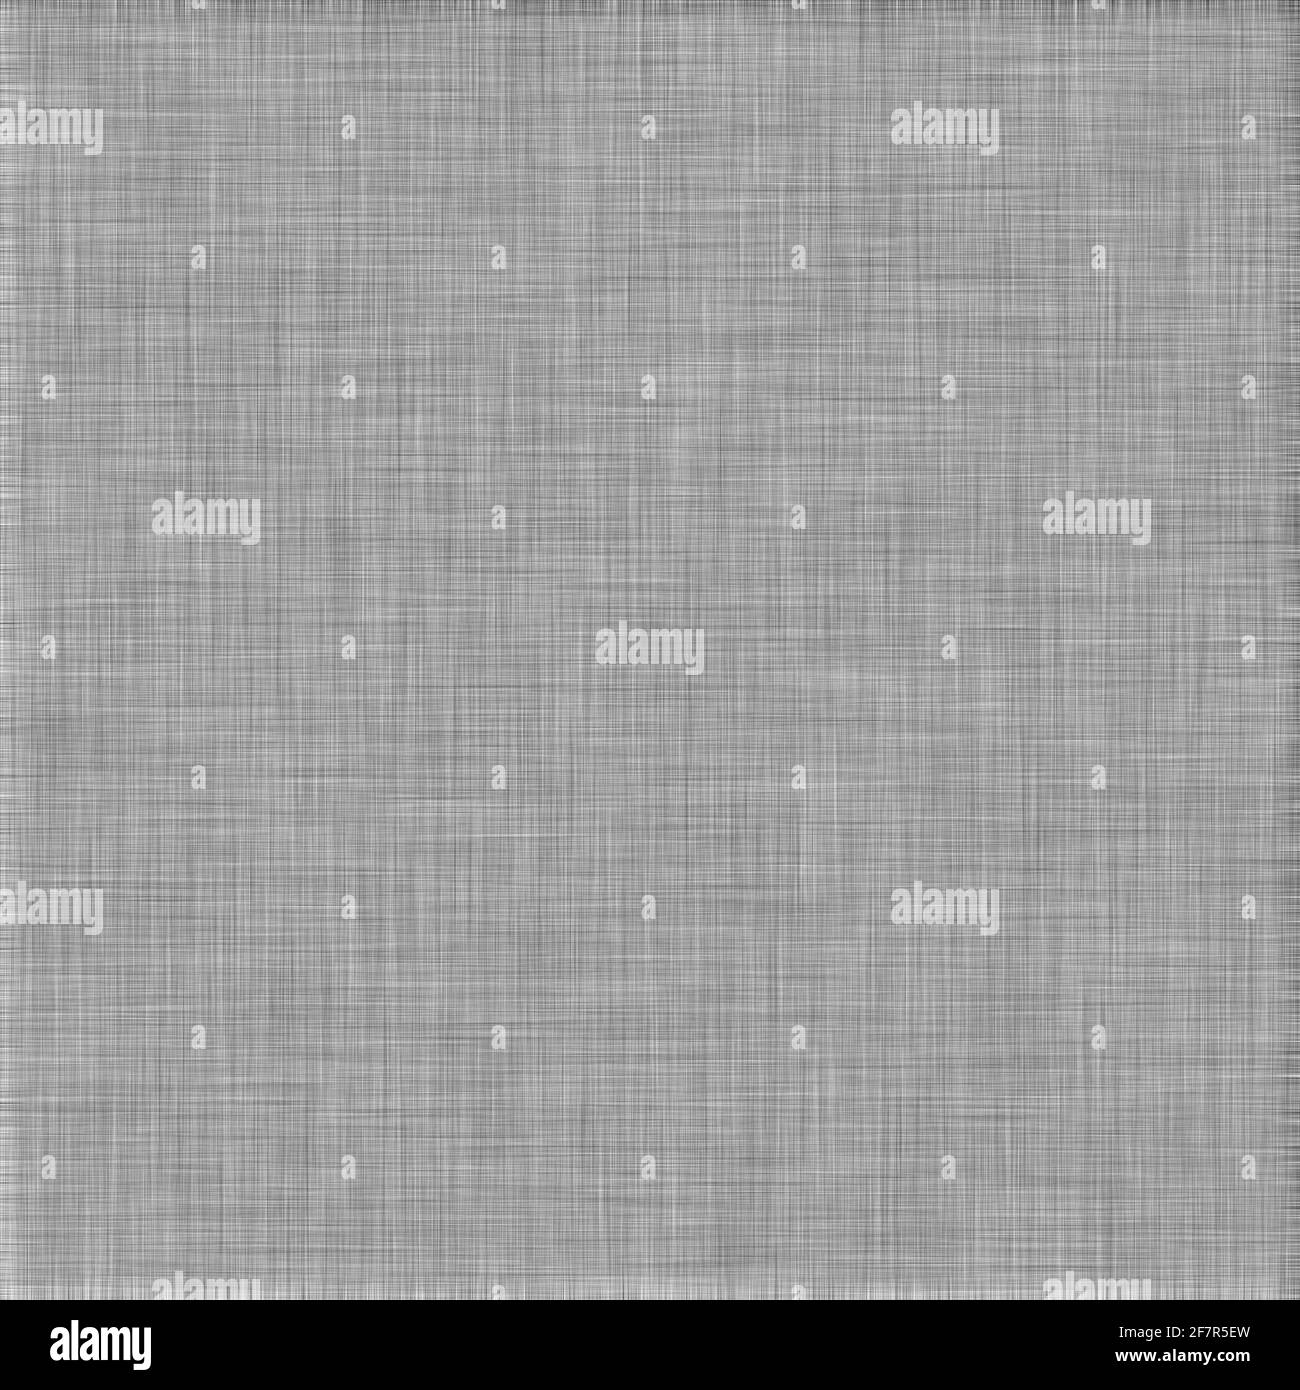 Abstract digital big background with thin sharp orthogonal lines in light shades of gray as a fabric texture Stock Photo